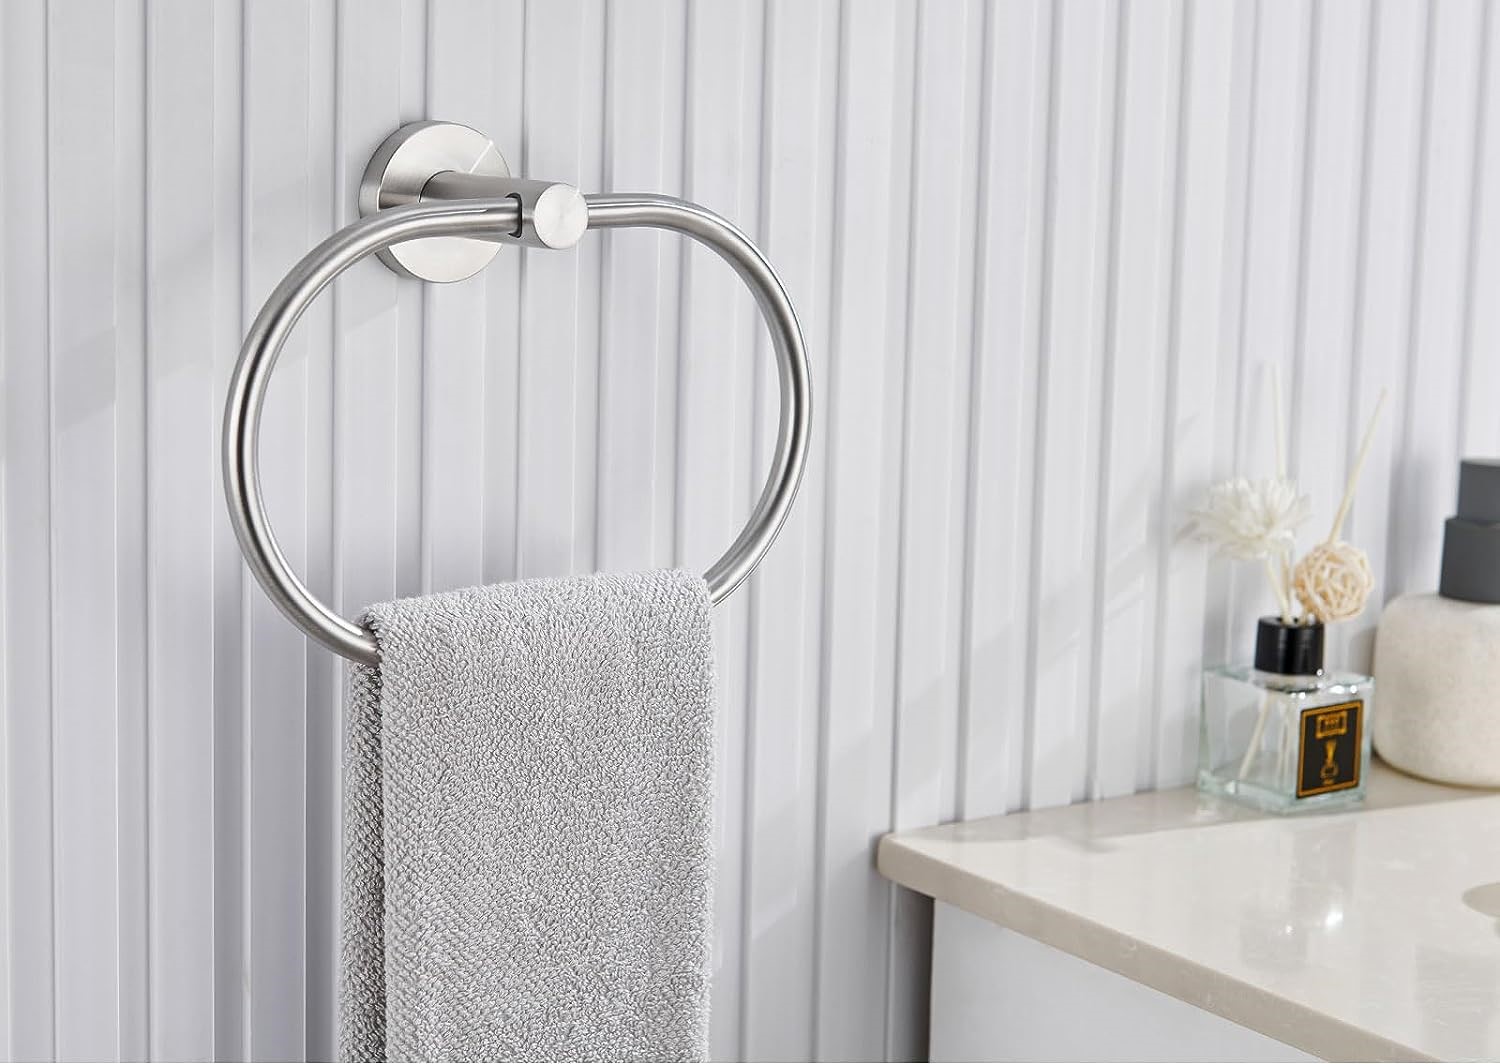 Where To Hang A Bathroom Towel Ring | Storables